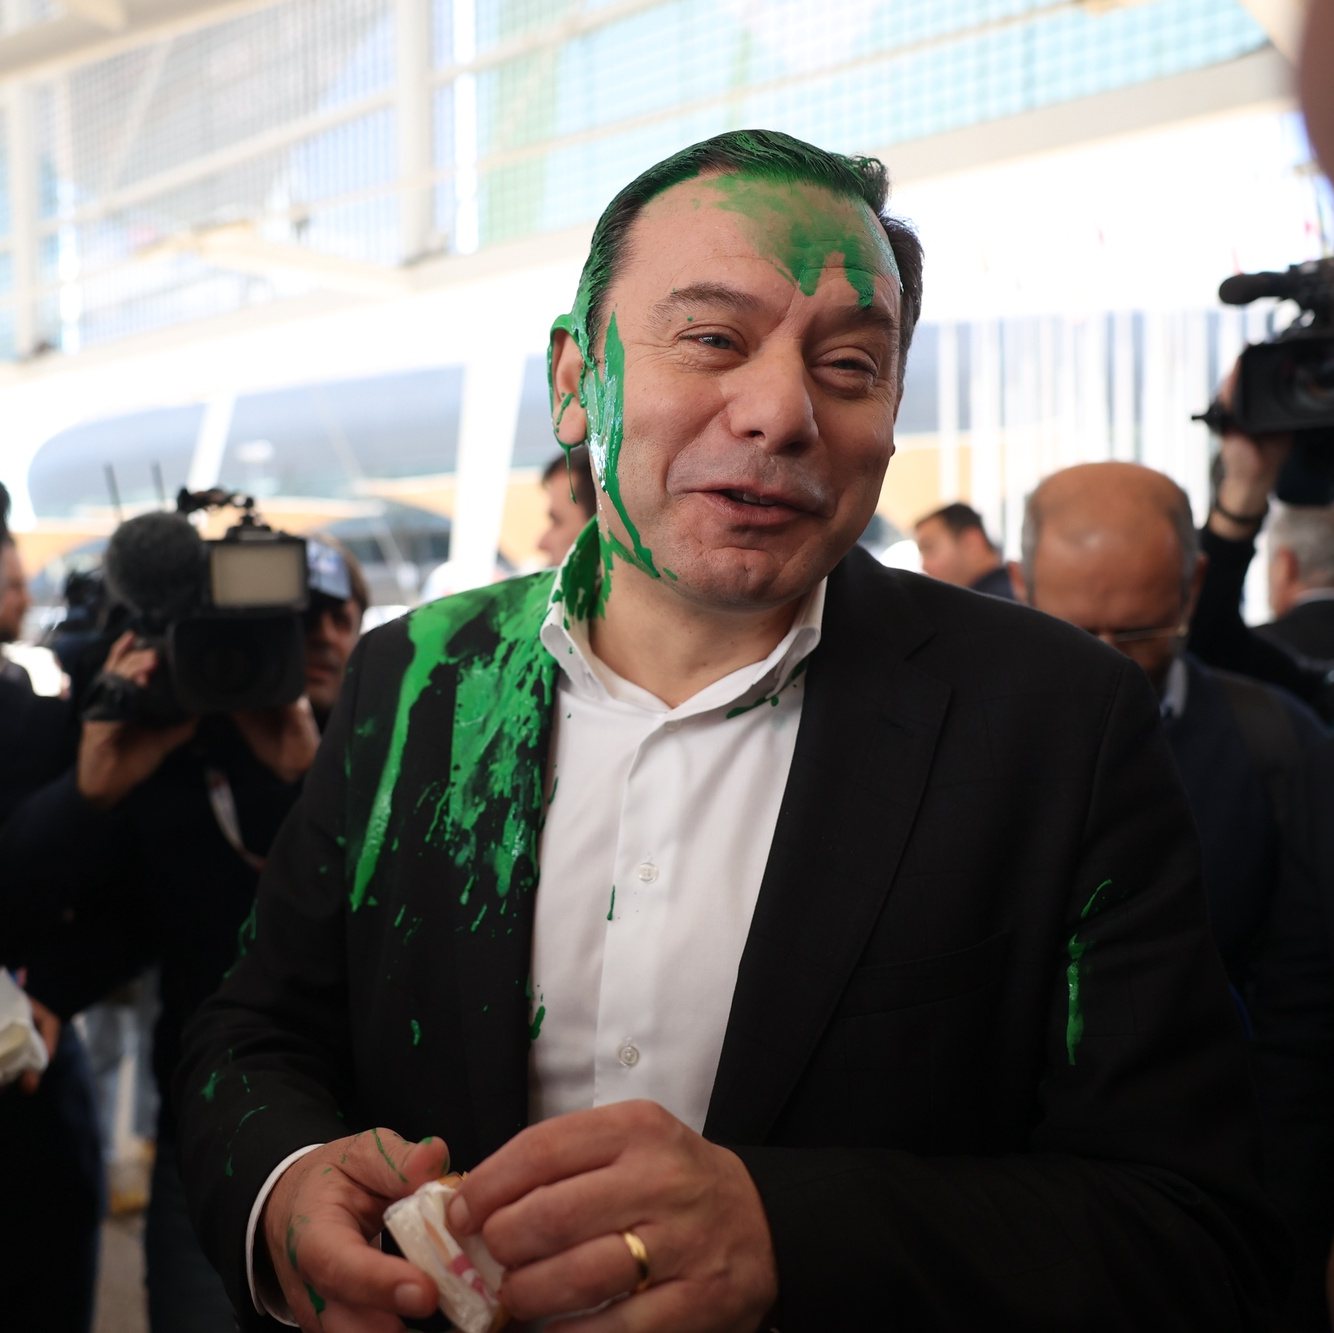 The president of the Democratic Social Party (PSD) Luis Montenegro (C) reacts after being hit with paint at his arrival at the Lisbon Tourism Fair (BTL) during a Democratic Alliance (AD) campaign, as part of the campaign for upcoming legislative elections, in Lisbon, Portugal, 28 February 2024. On January 15, the President of the Republic decreed the dissolution of parliament and the calling of early legislative elections on 10 March, following the resignation of Prime Minister Antonio Costa presented on 07 November 2023. ANDRE KOSTERS/LUSA